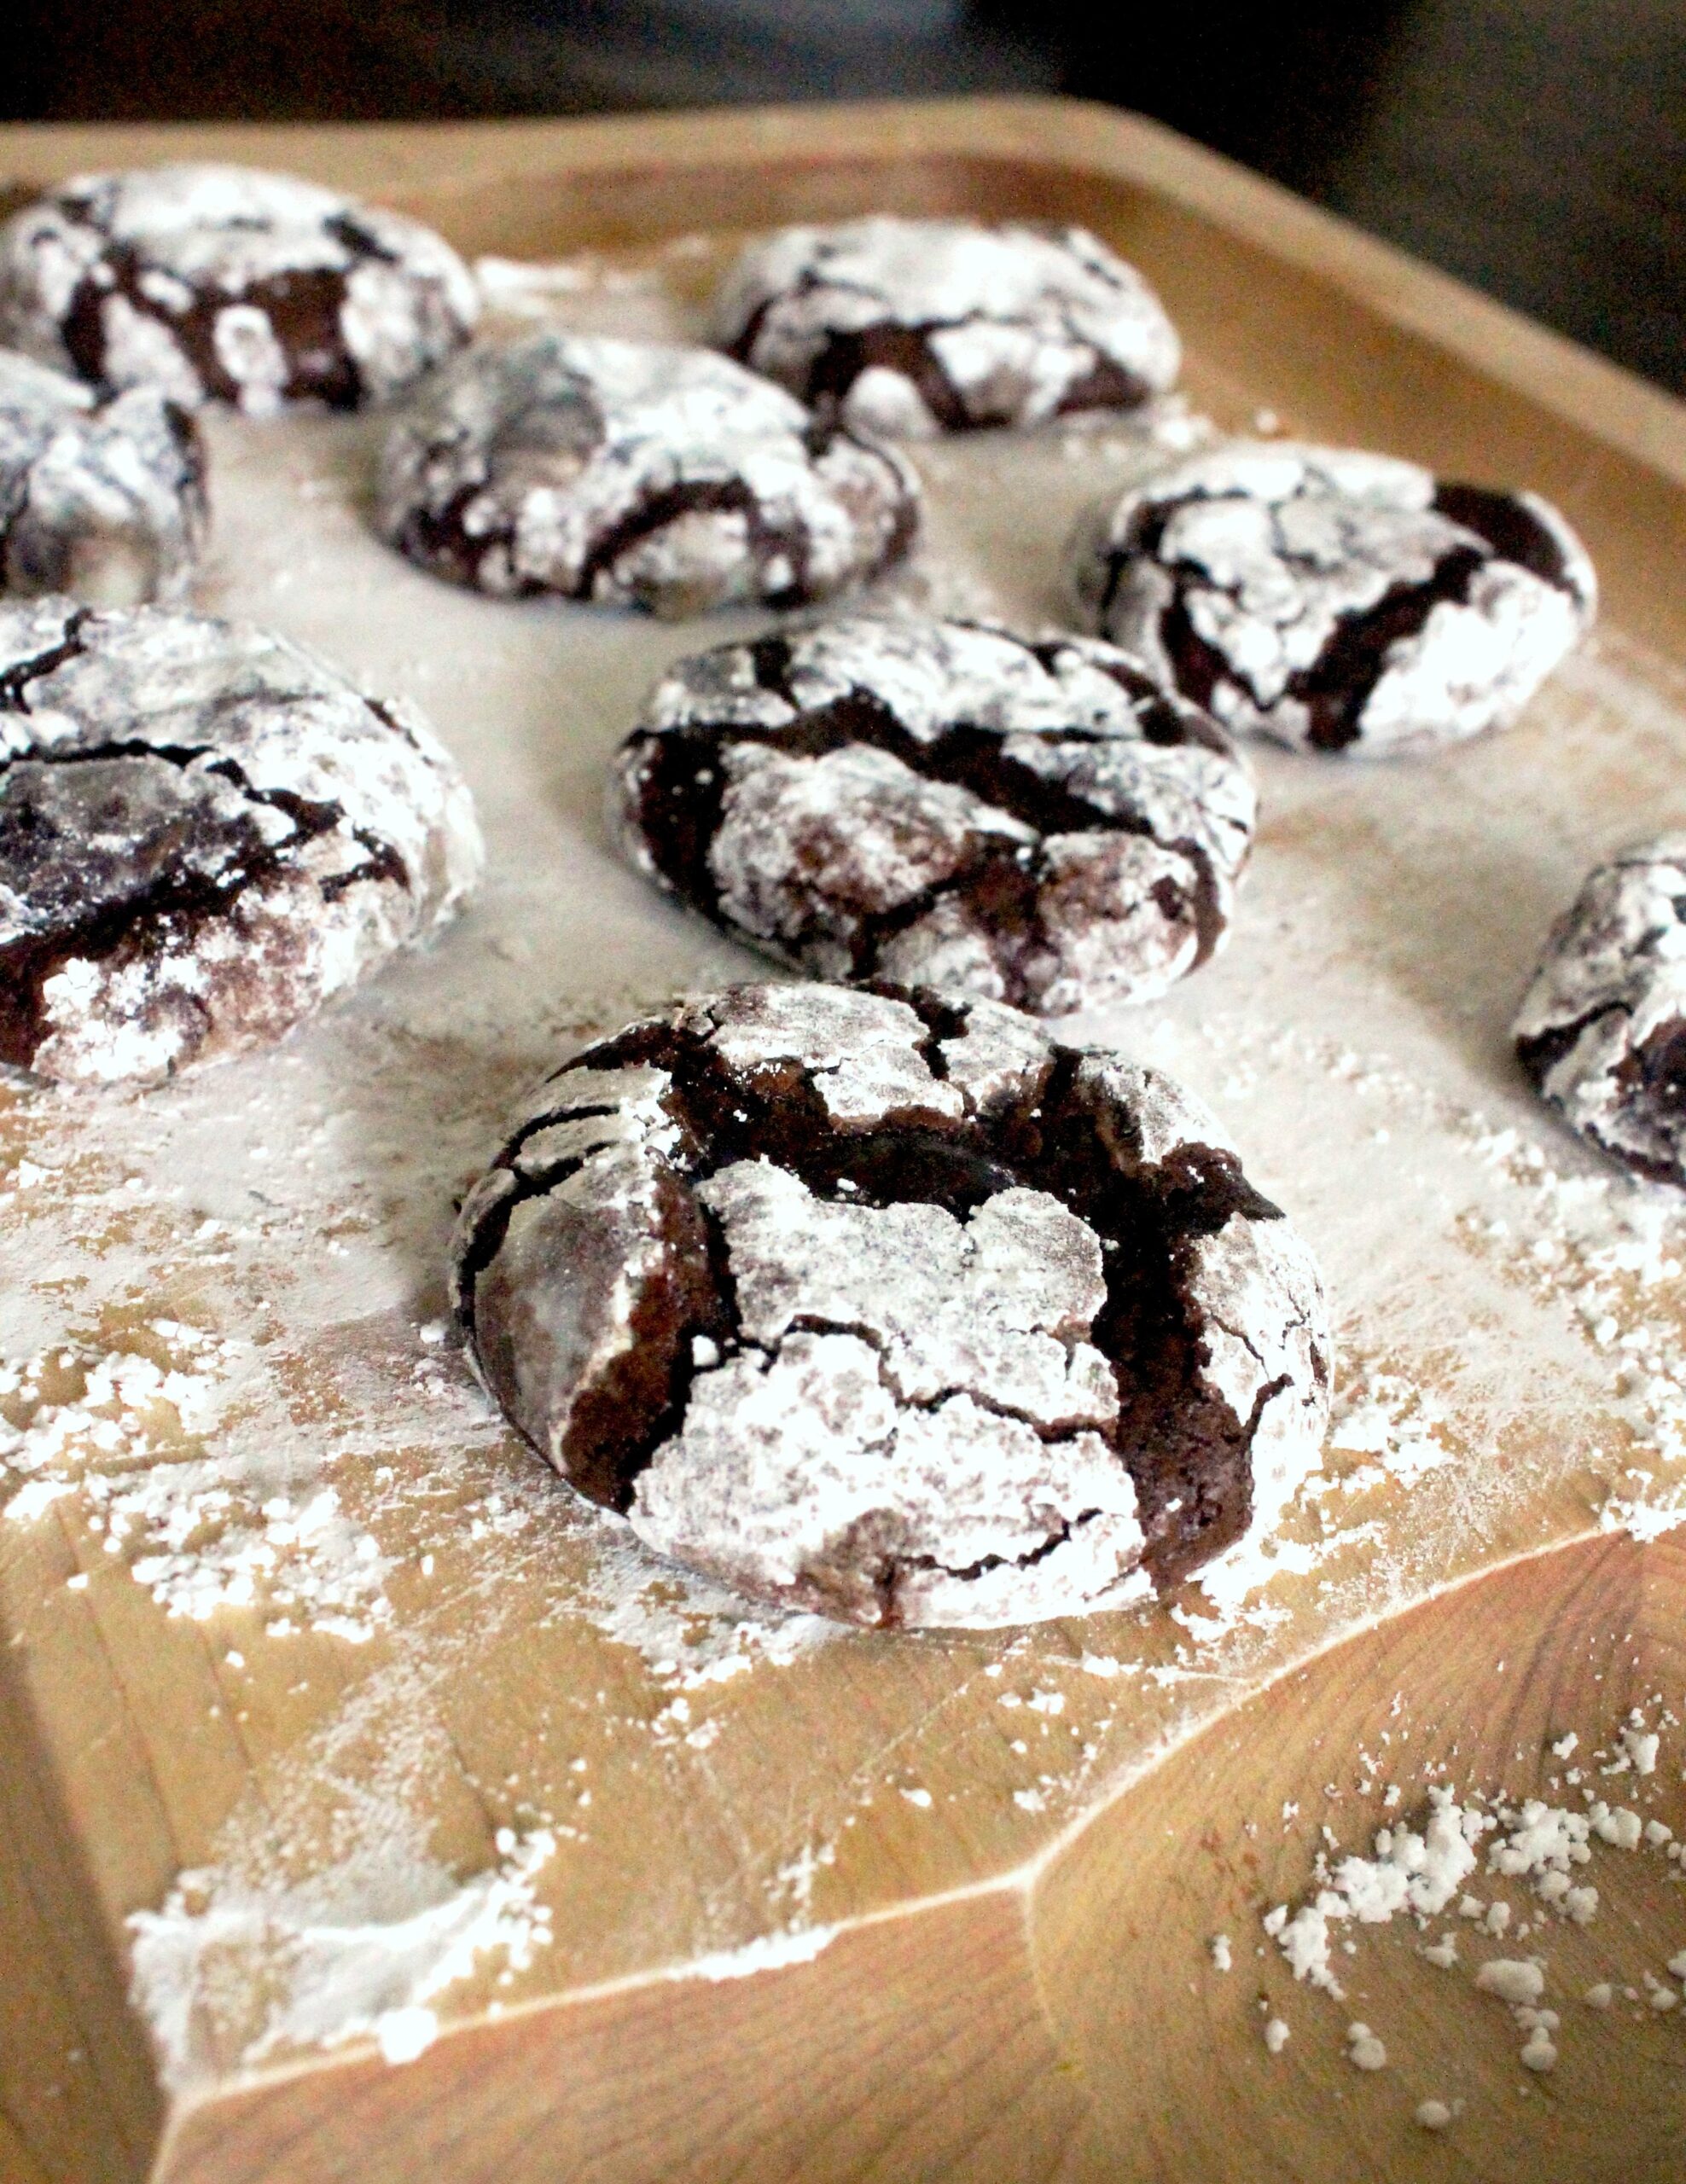  The chocolate chunks in these cookies are like little pockets of pure delight.